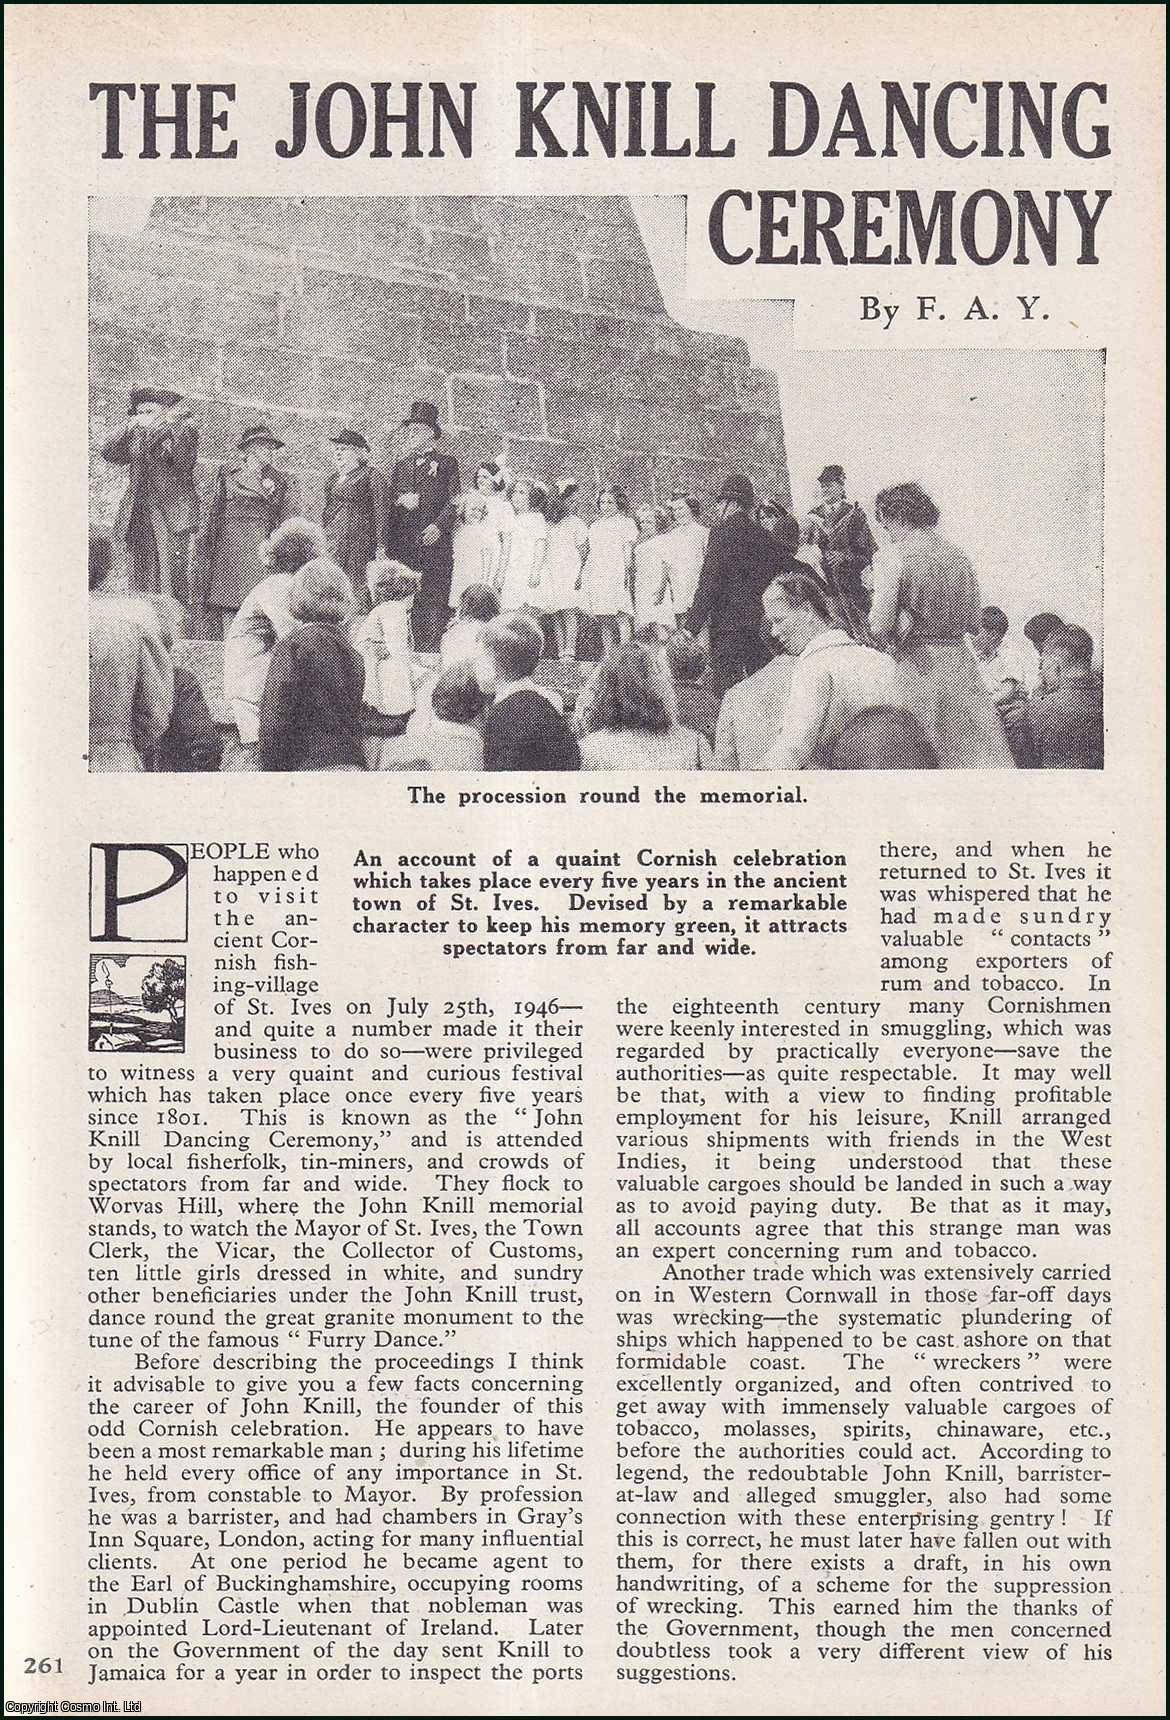 F.A.Y. - The John Knill Dancing Ceremony : Cornish Celebration which take place every five years in the Ancient town of St. Ives. An uncommon original article from the Wide World Magazine, 1947.